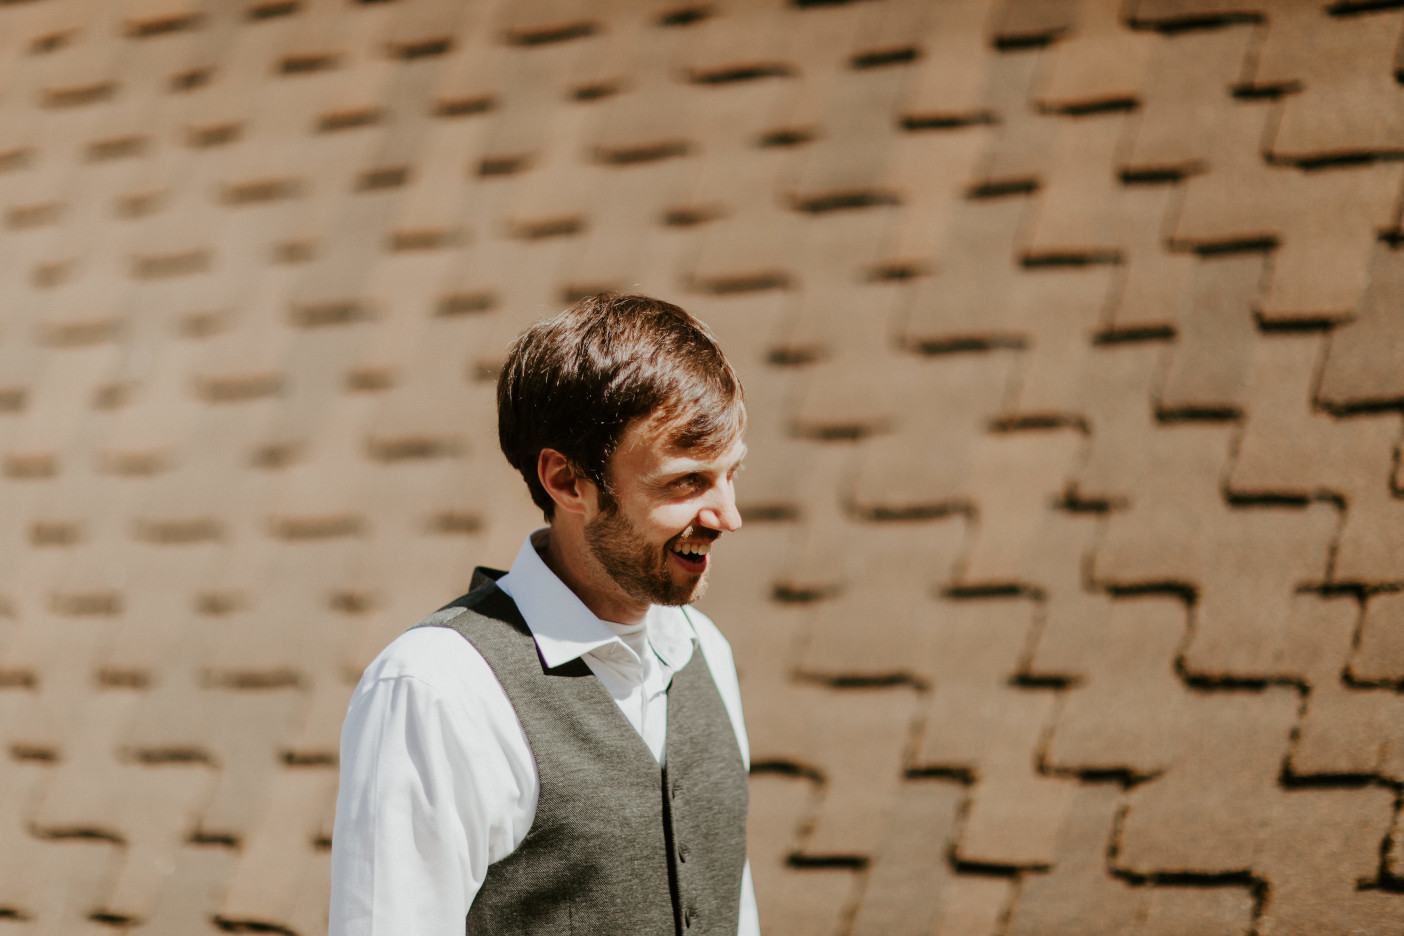 Dan reacts to Hannah in Corvallis, Oregon during their Oregon Adventure. Intimate wedding photography in Corvallis Oregon by Sienna Plus Josh.